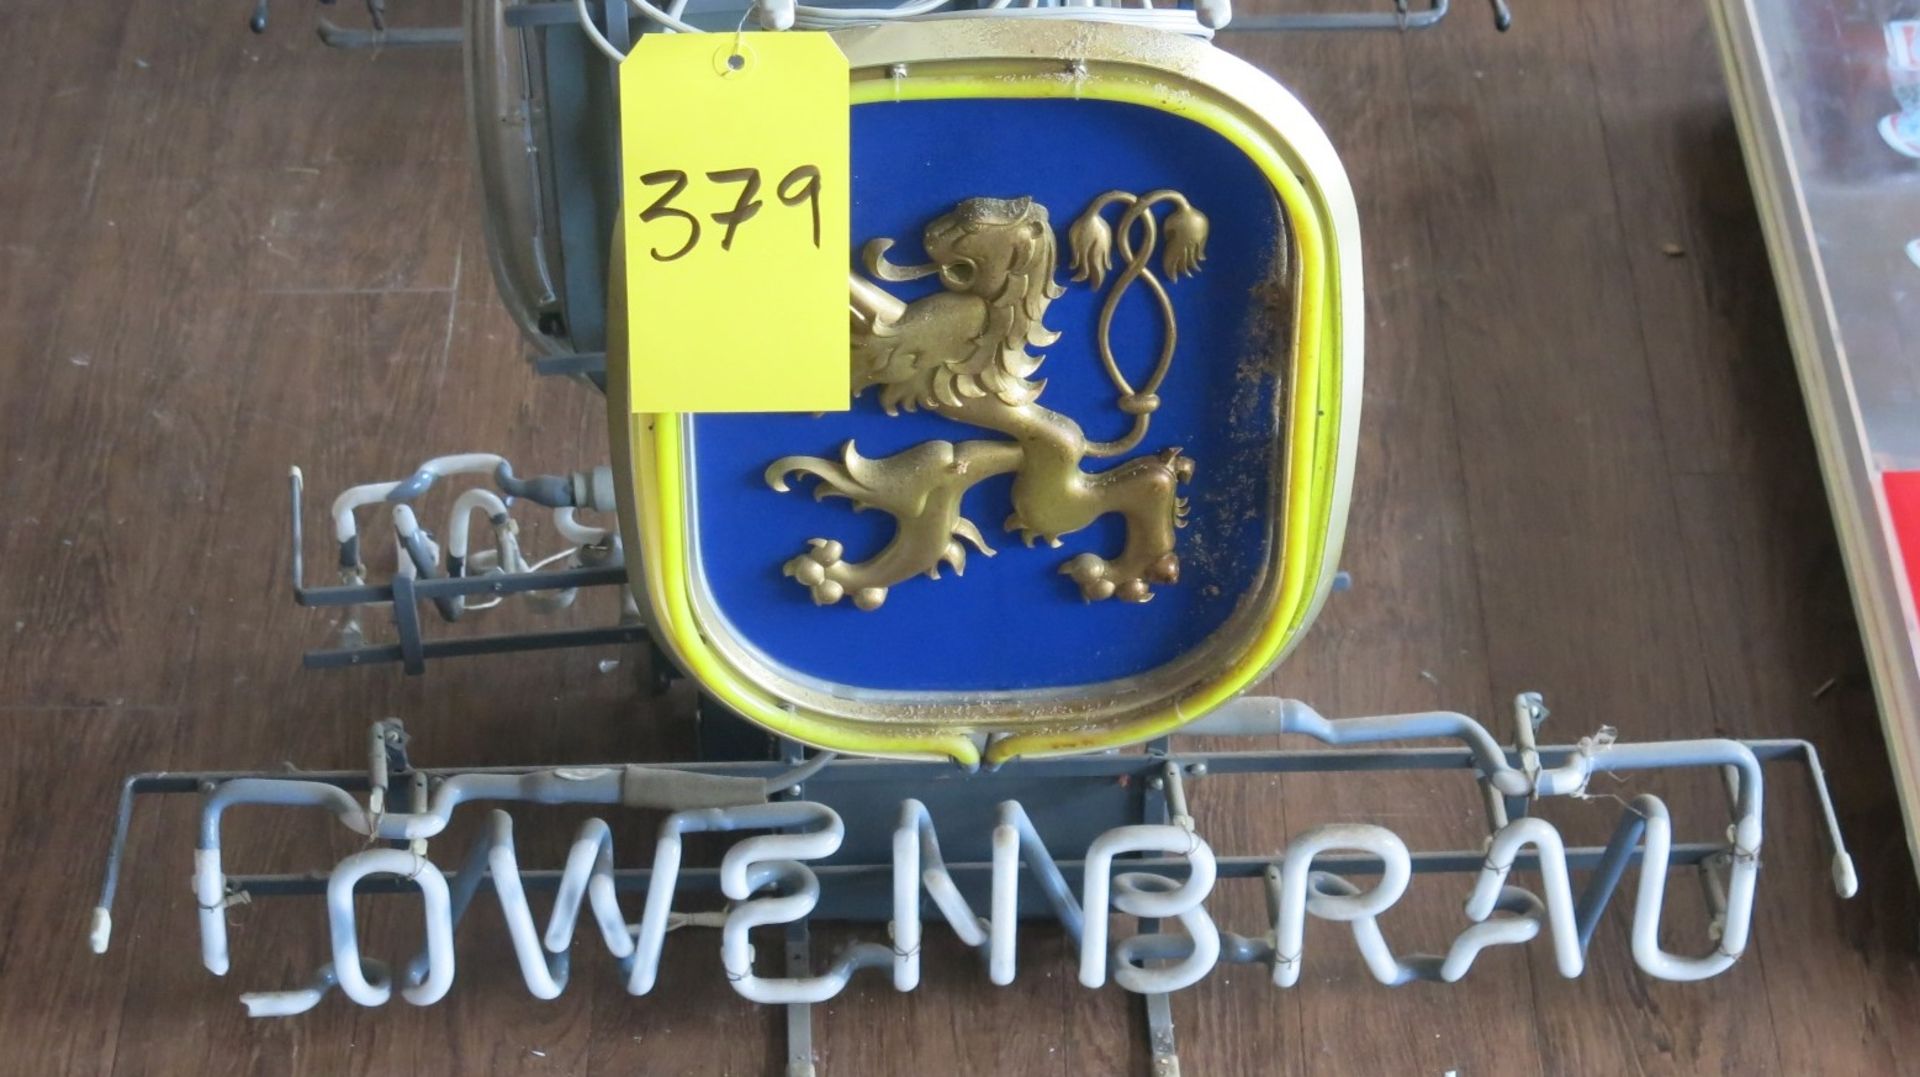 Lowenbrau  Sign (not working)